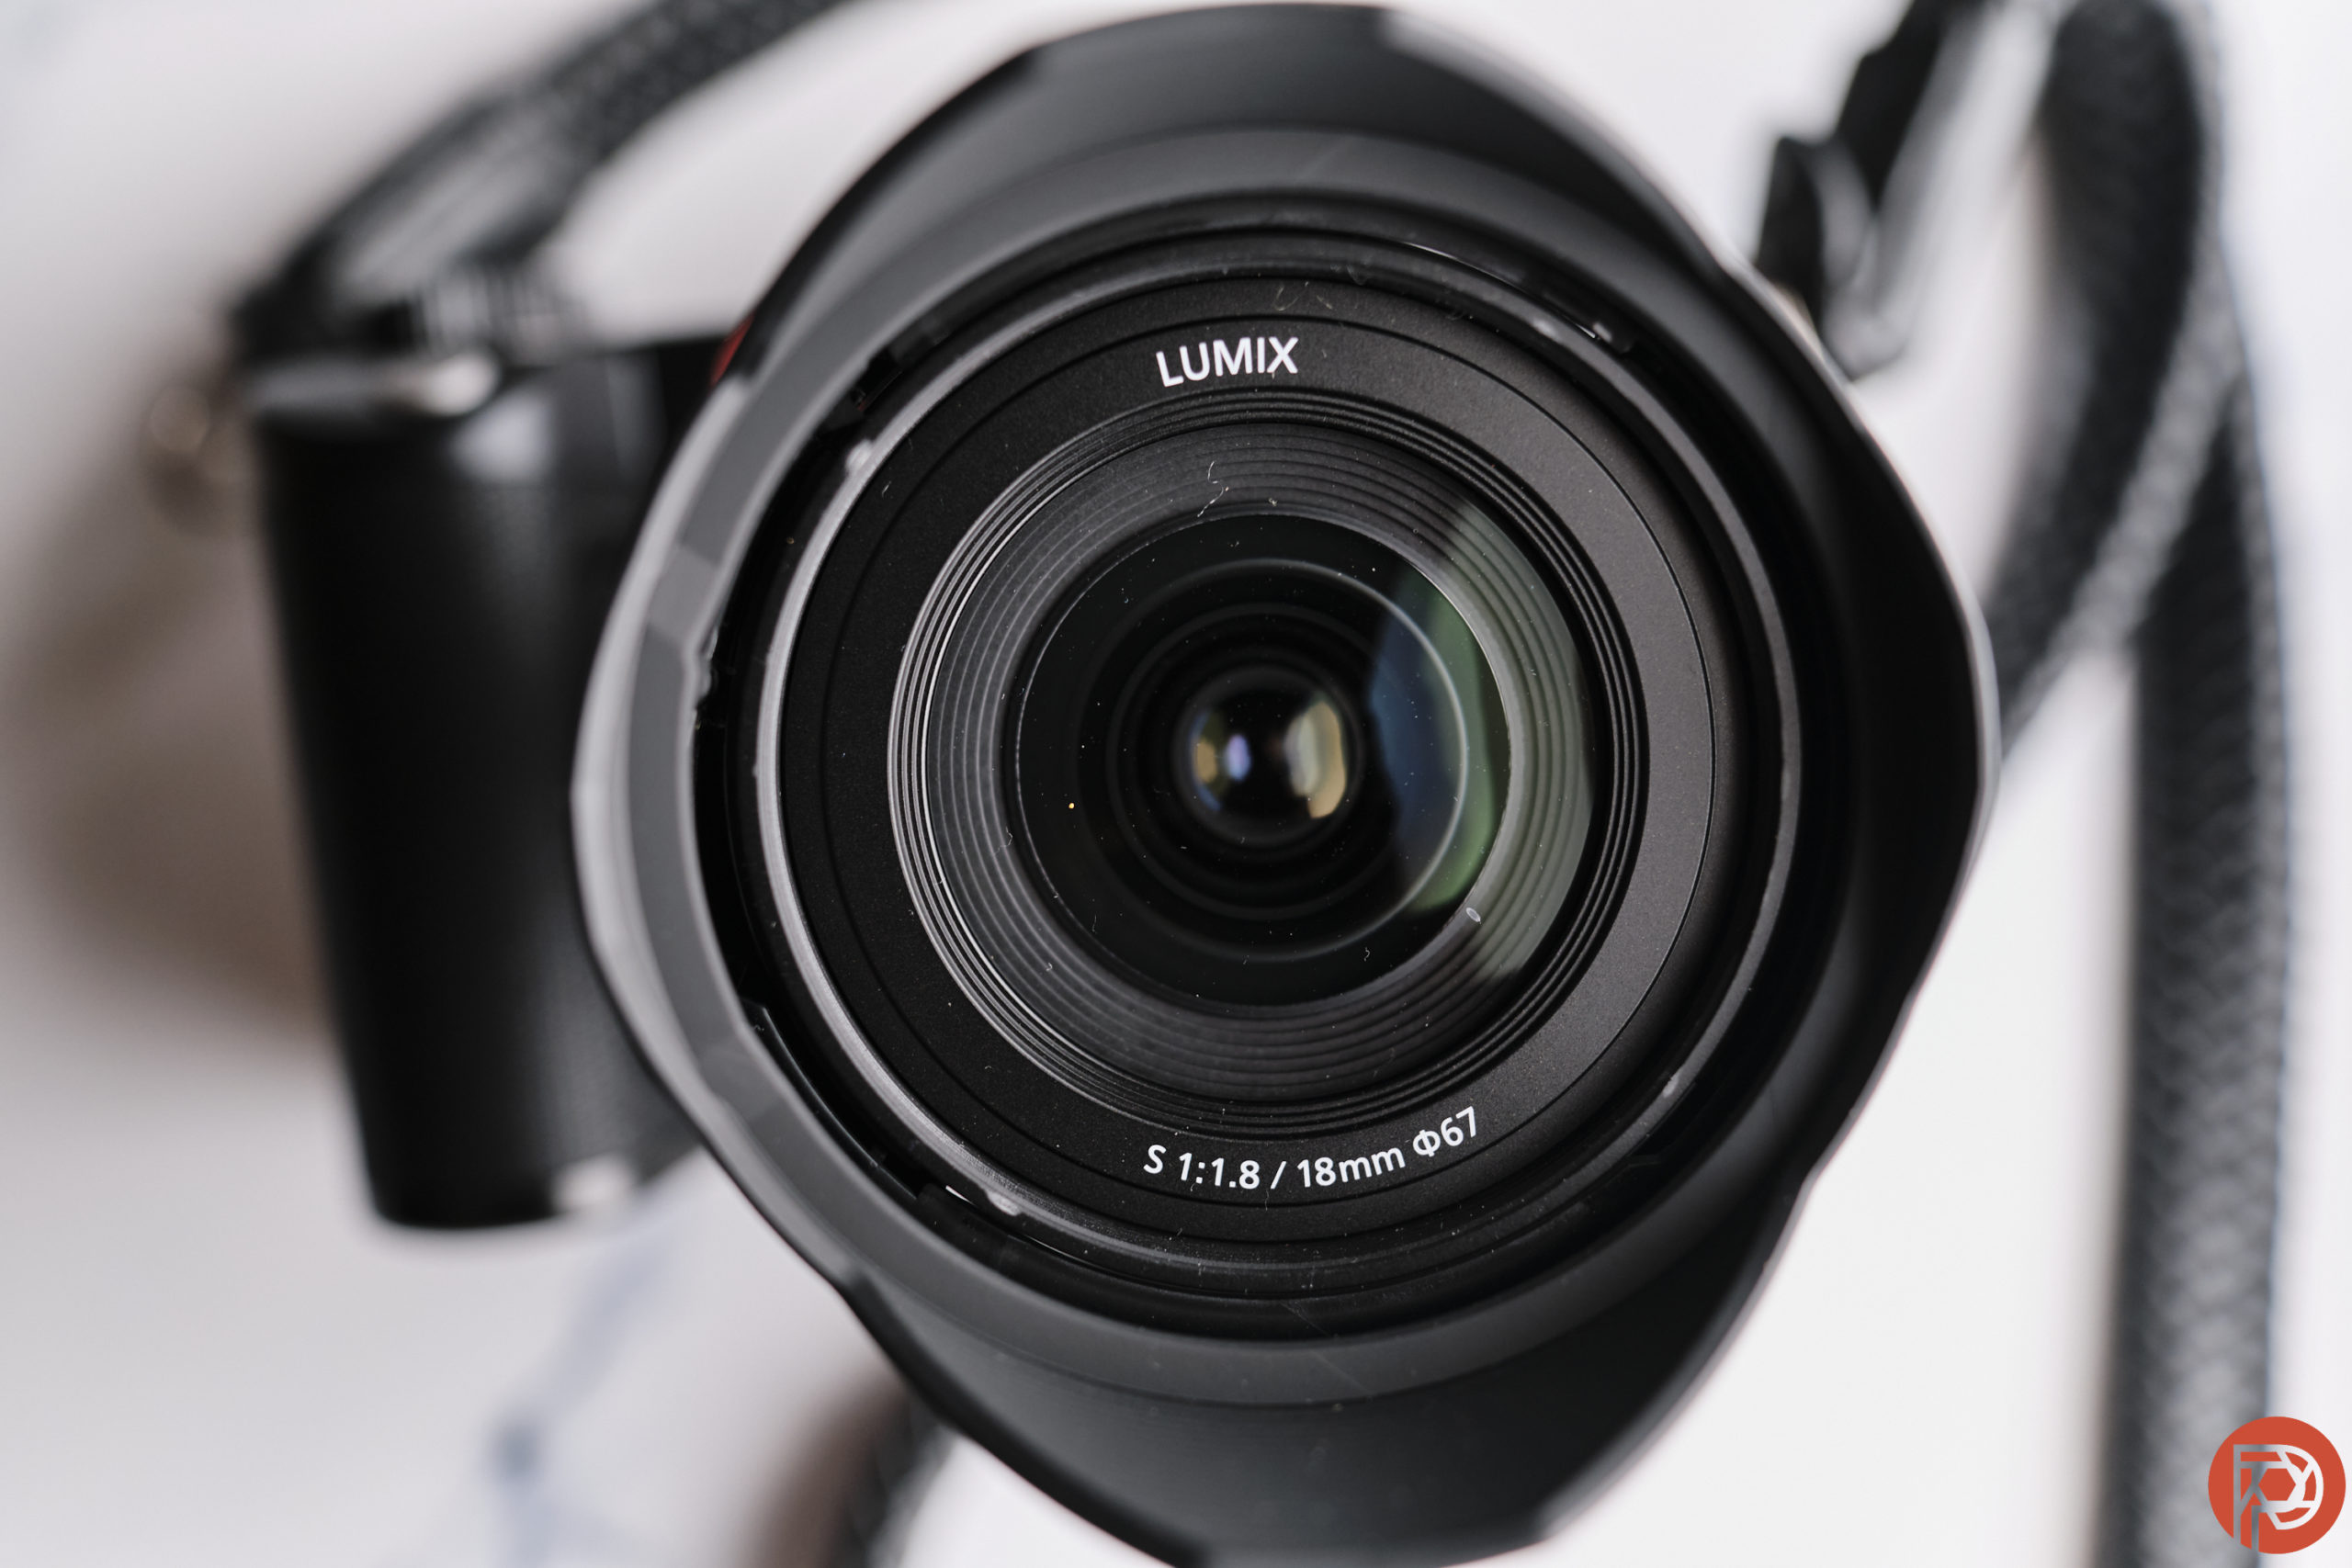 Chris Gampat The Phoblographer Panasonic 18mm f1.8 product images review 21-160s400 2